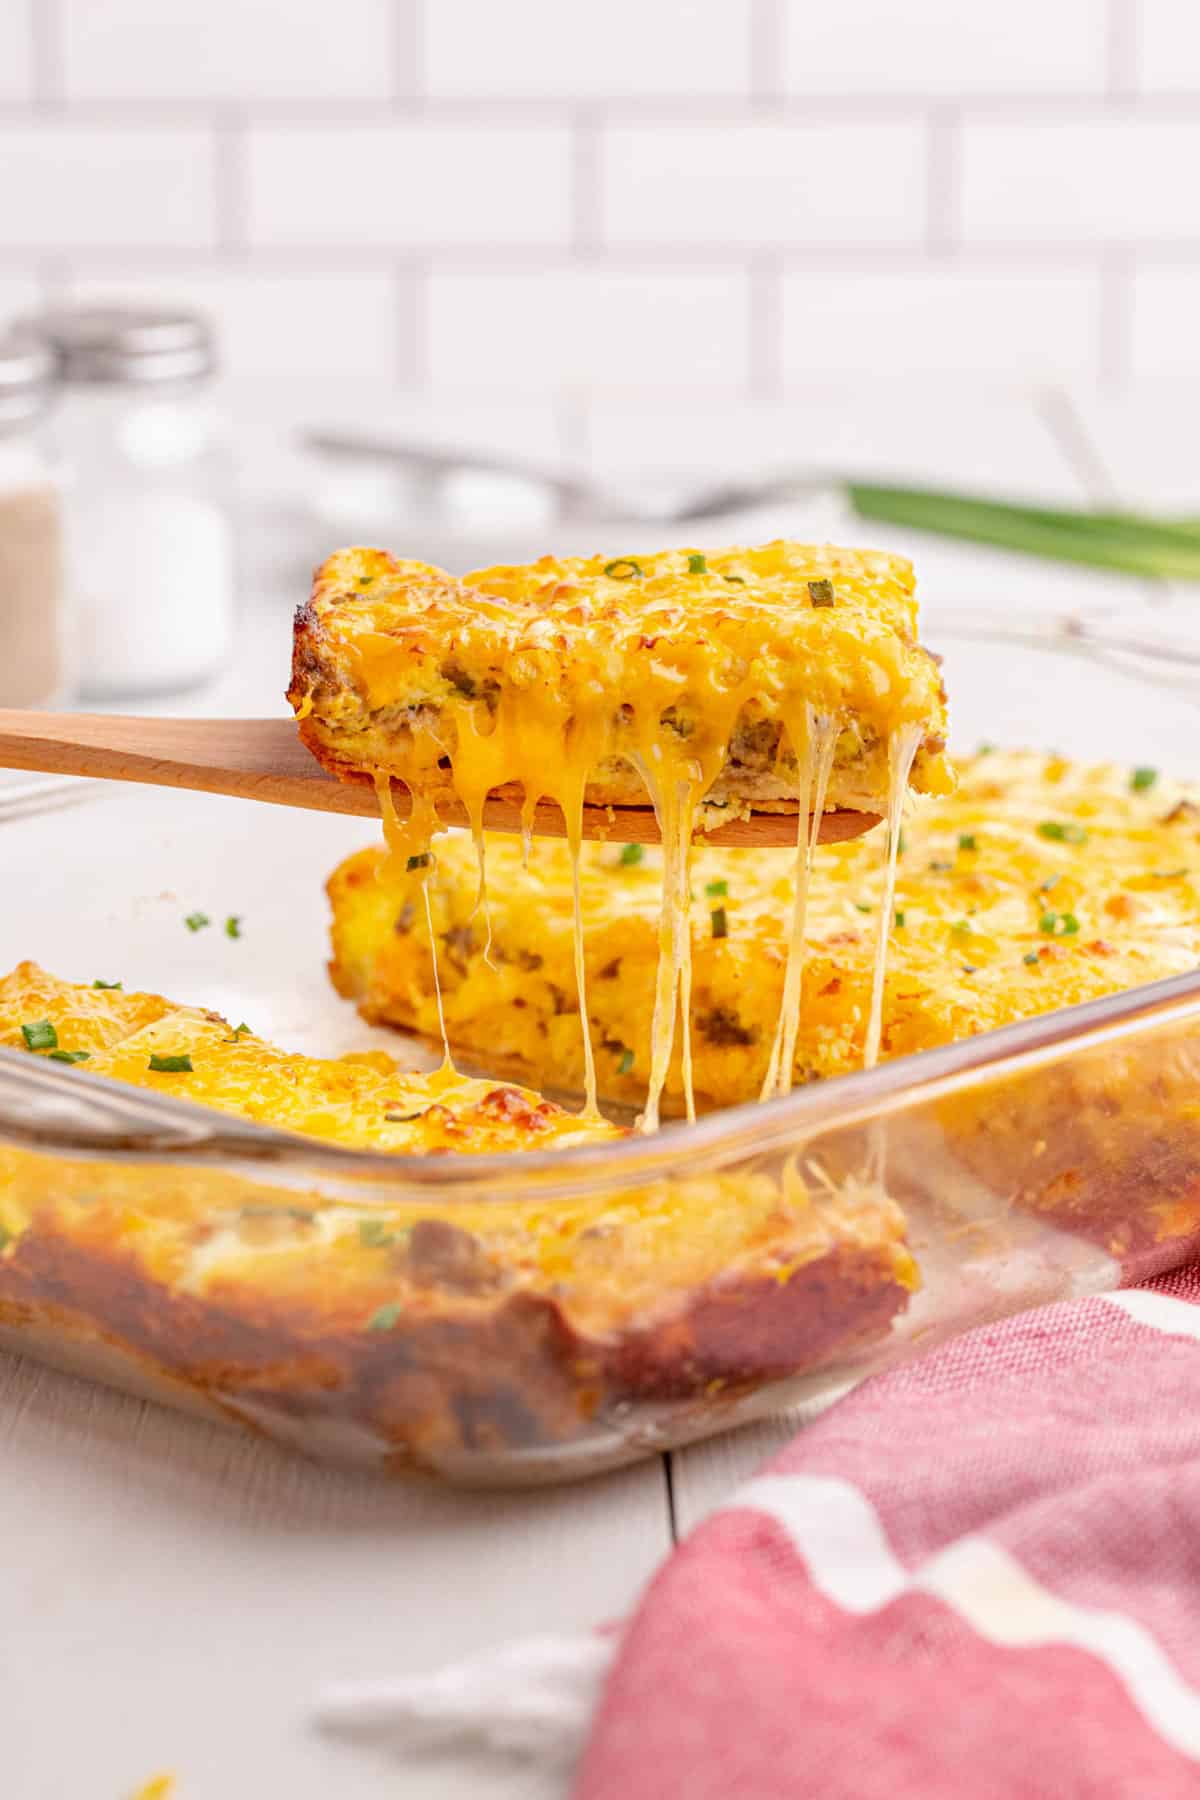 Crescent Roll Egg Bake Recipe Hot Out of the Oven Oozing with Cheese